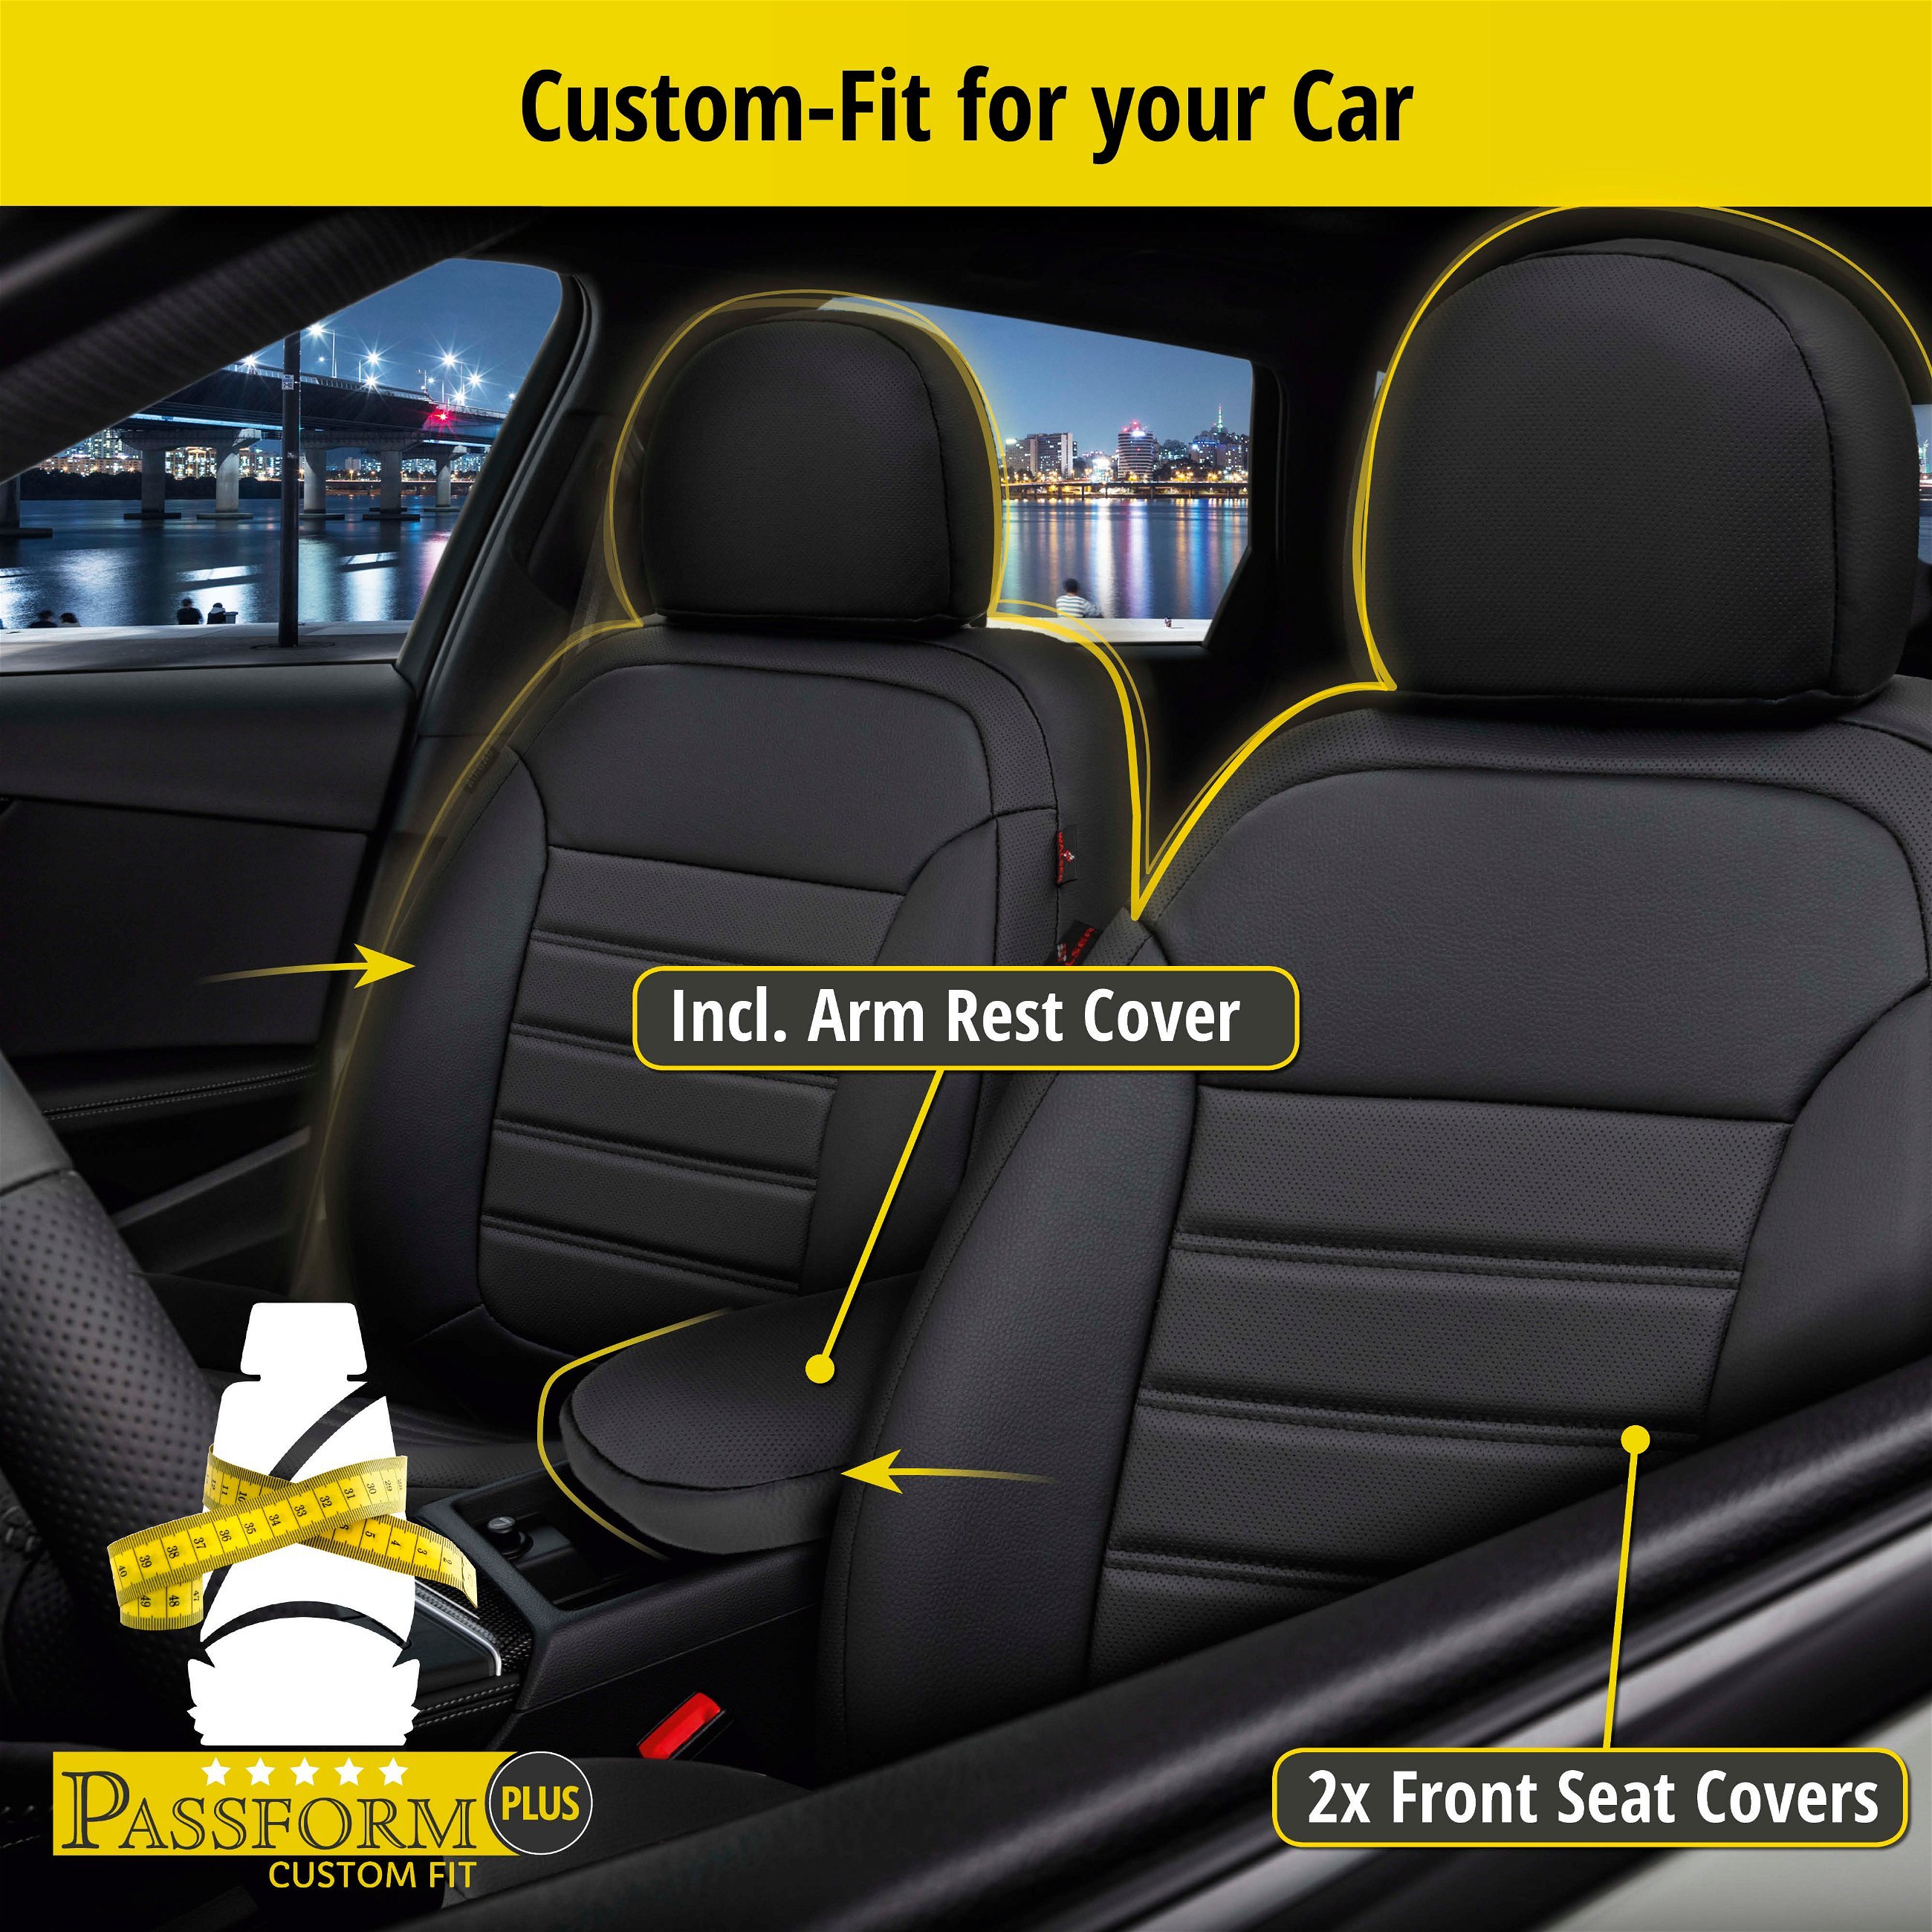 Seat Cover Robusto for VW Passat Variant (3G5, CB5) 08/2014-Today, 2 seat covers for normal seats